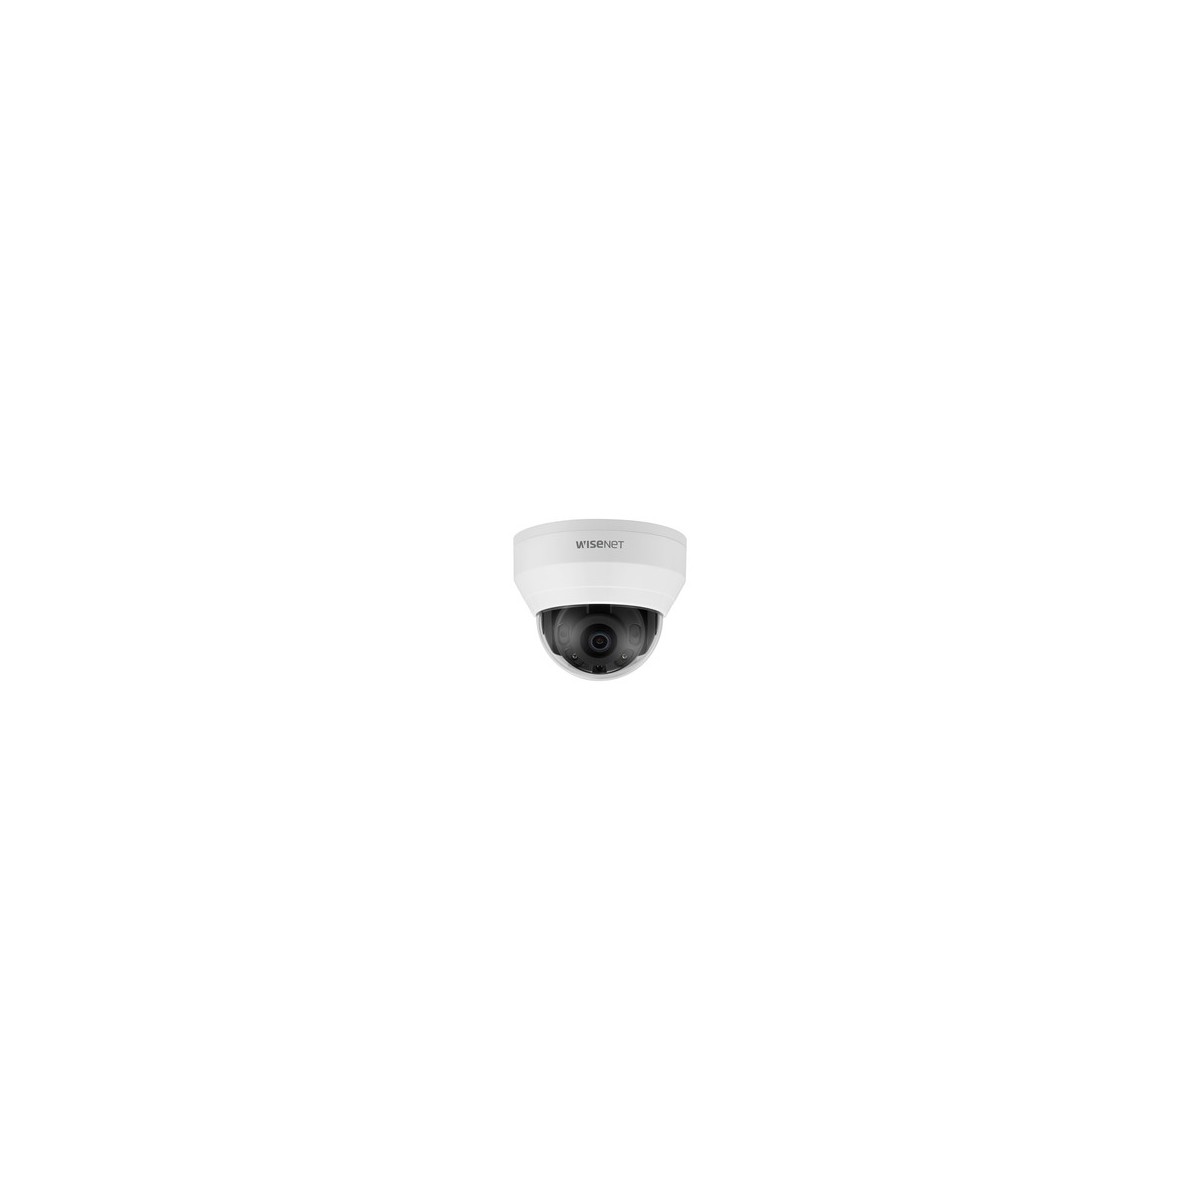 Hanwha Techwin Hanwha QND-8020R - IP security camera - Outdoor - Wired - Simplified Chinese - Traditional Chinese - Czech - Germ